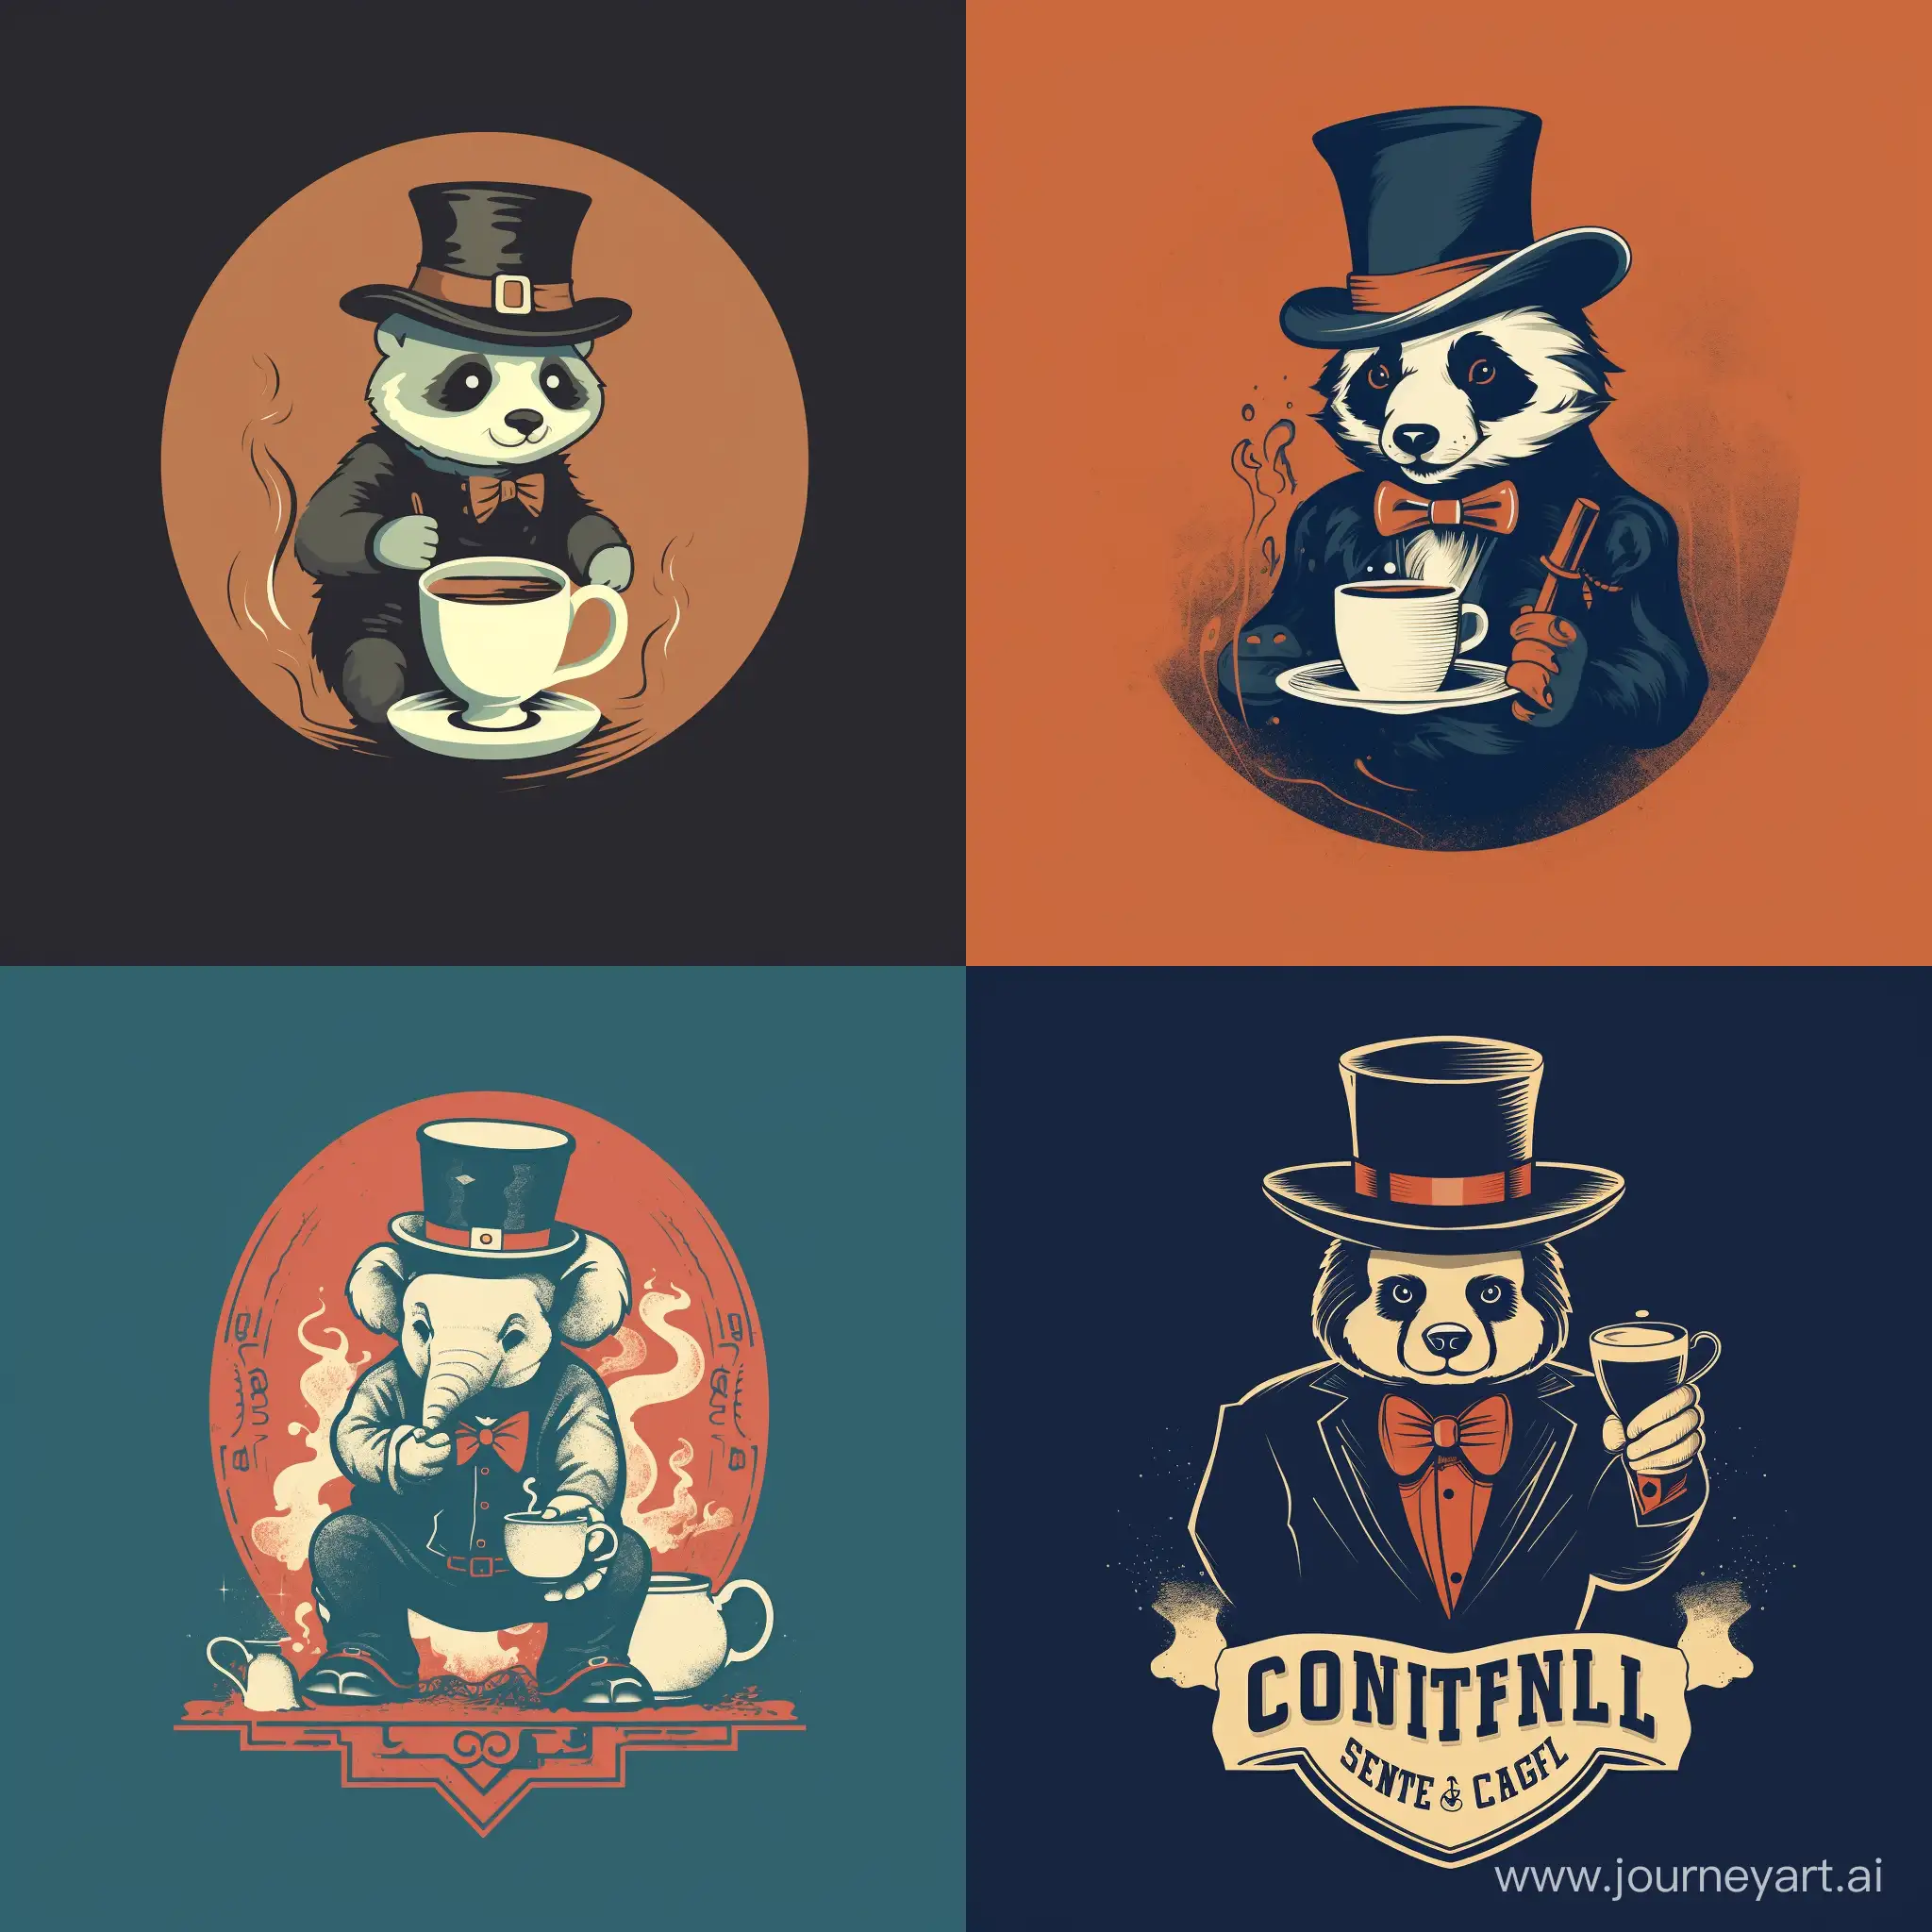 "Stencil-based minimalistic illustration in vertical A1 aspect ratio with a vintage color palette. A stylized panda wearing a classic top hat stands prominently, using sharp edges. The panda holds a steaming cup of coffee, emphasizing consumerism. The design integrates dark humor without any textured backdrop. A D.Sc (tech.) emblem is subtly incorporated, resembling a stencil, hinting at the challenges of academia. The monochromatic palette is broken with bursts of color for emphasis."